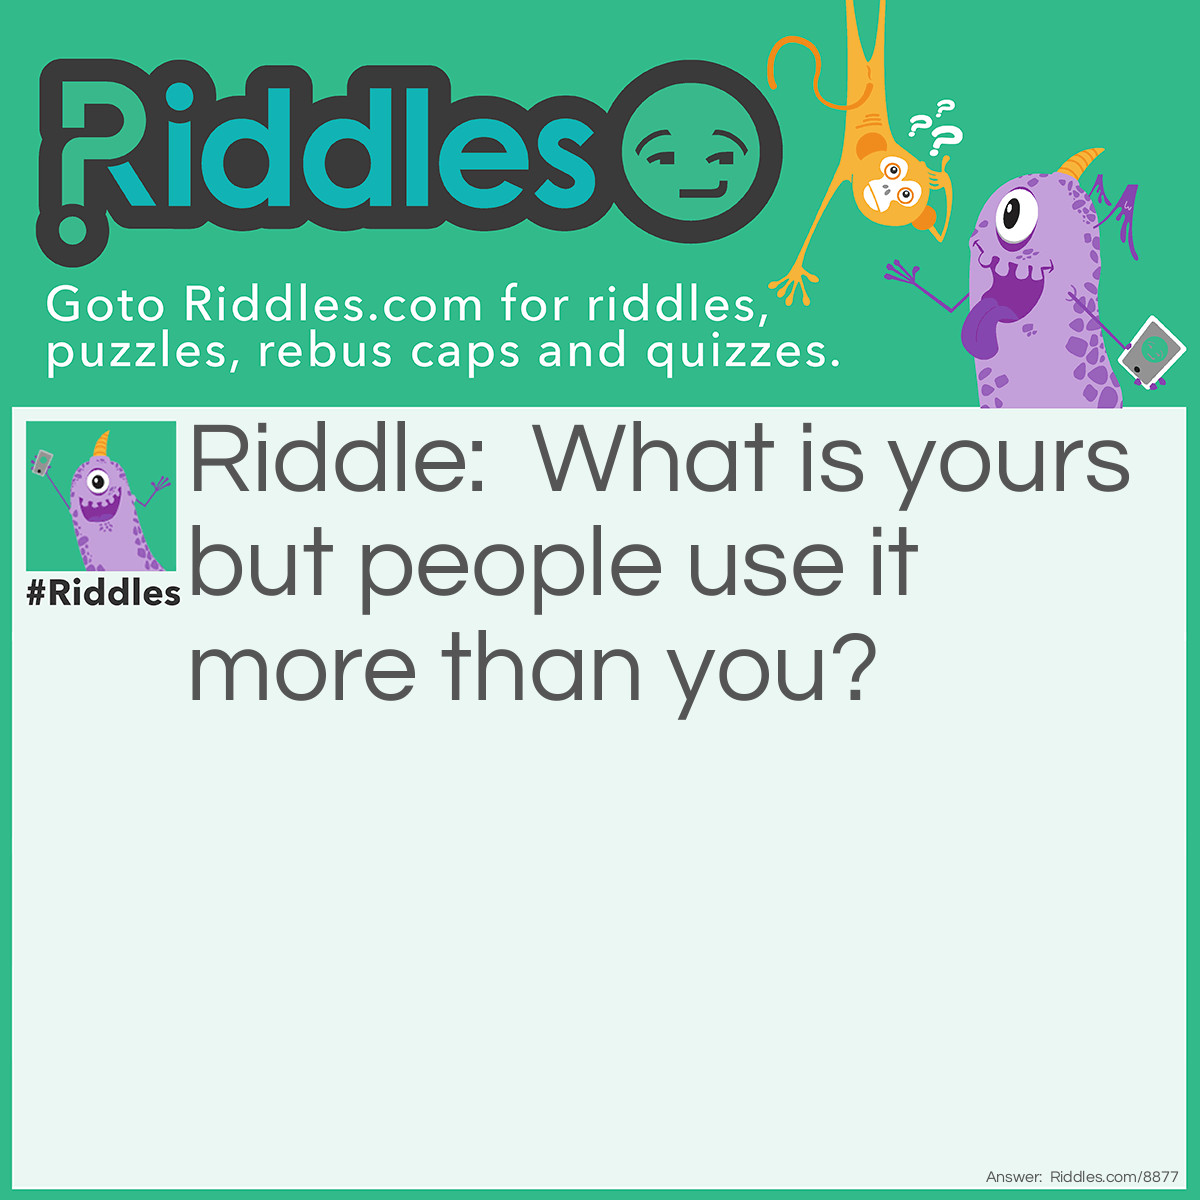 Riddle: What is yours but people use it more than you? Answer: Your name.